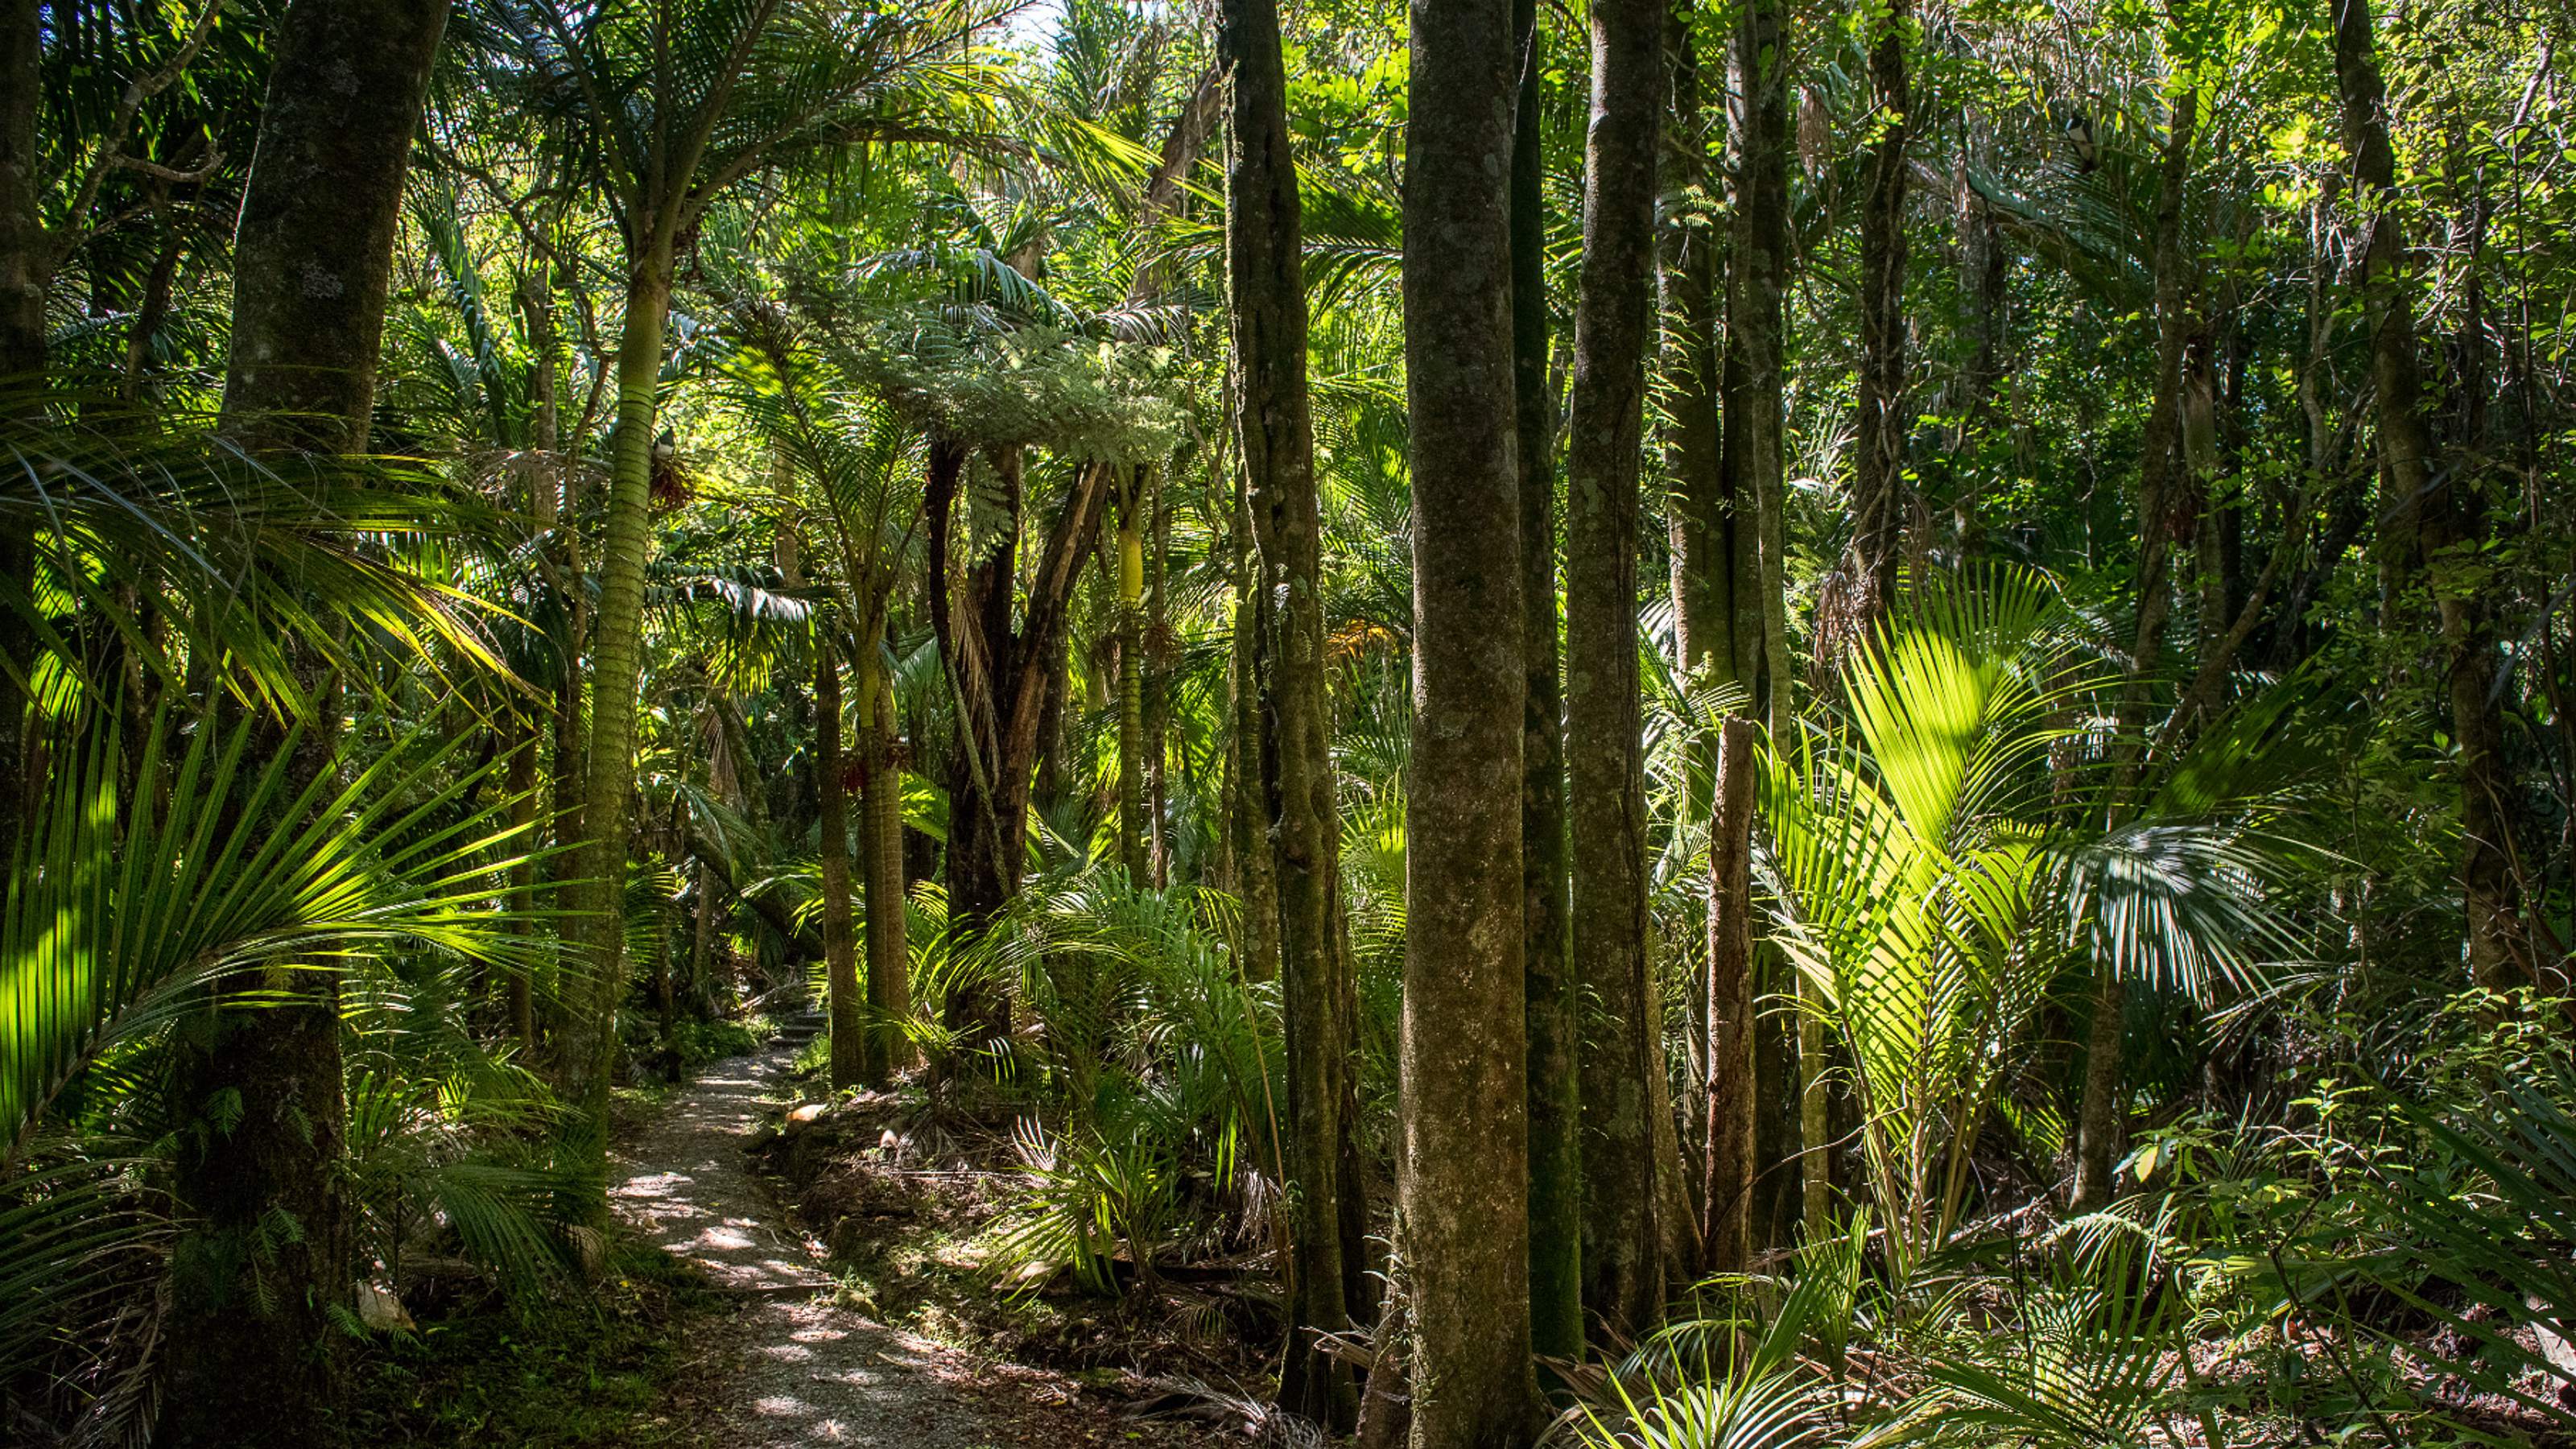 Interior view of dense forest with palm trees and native NZ trees